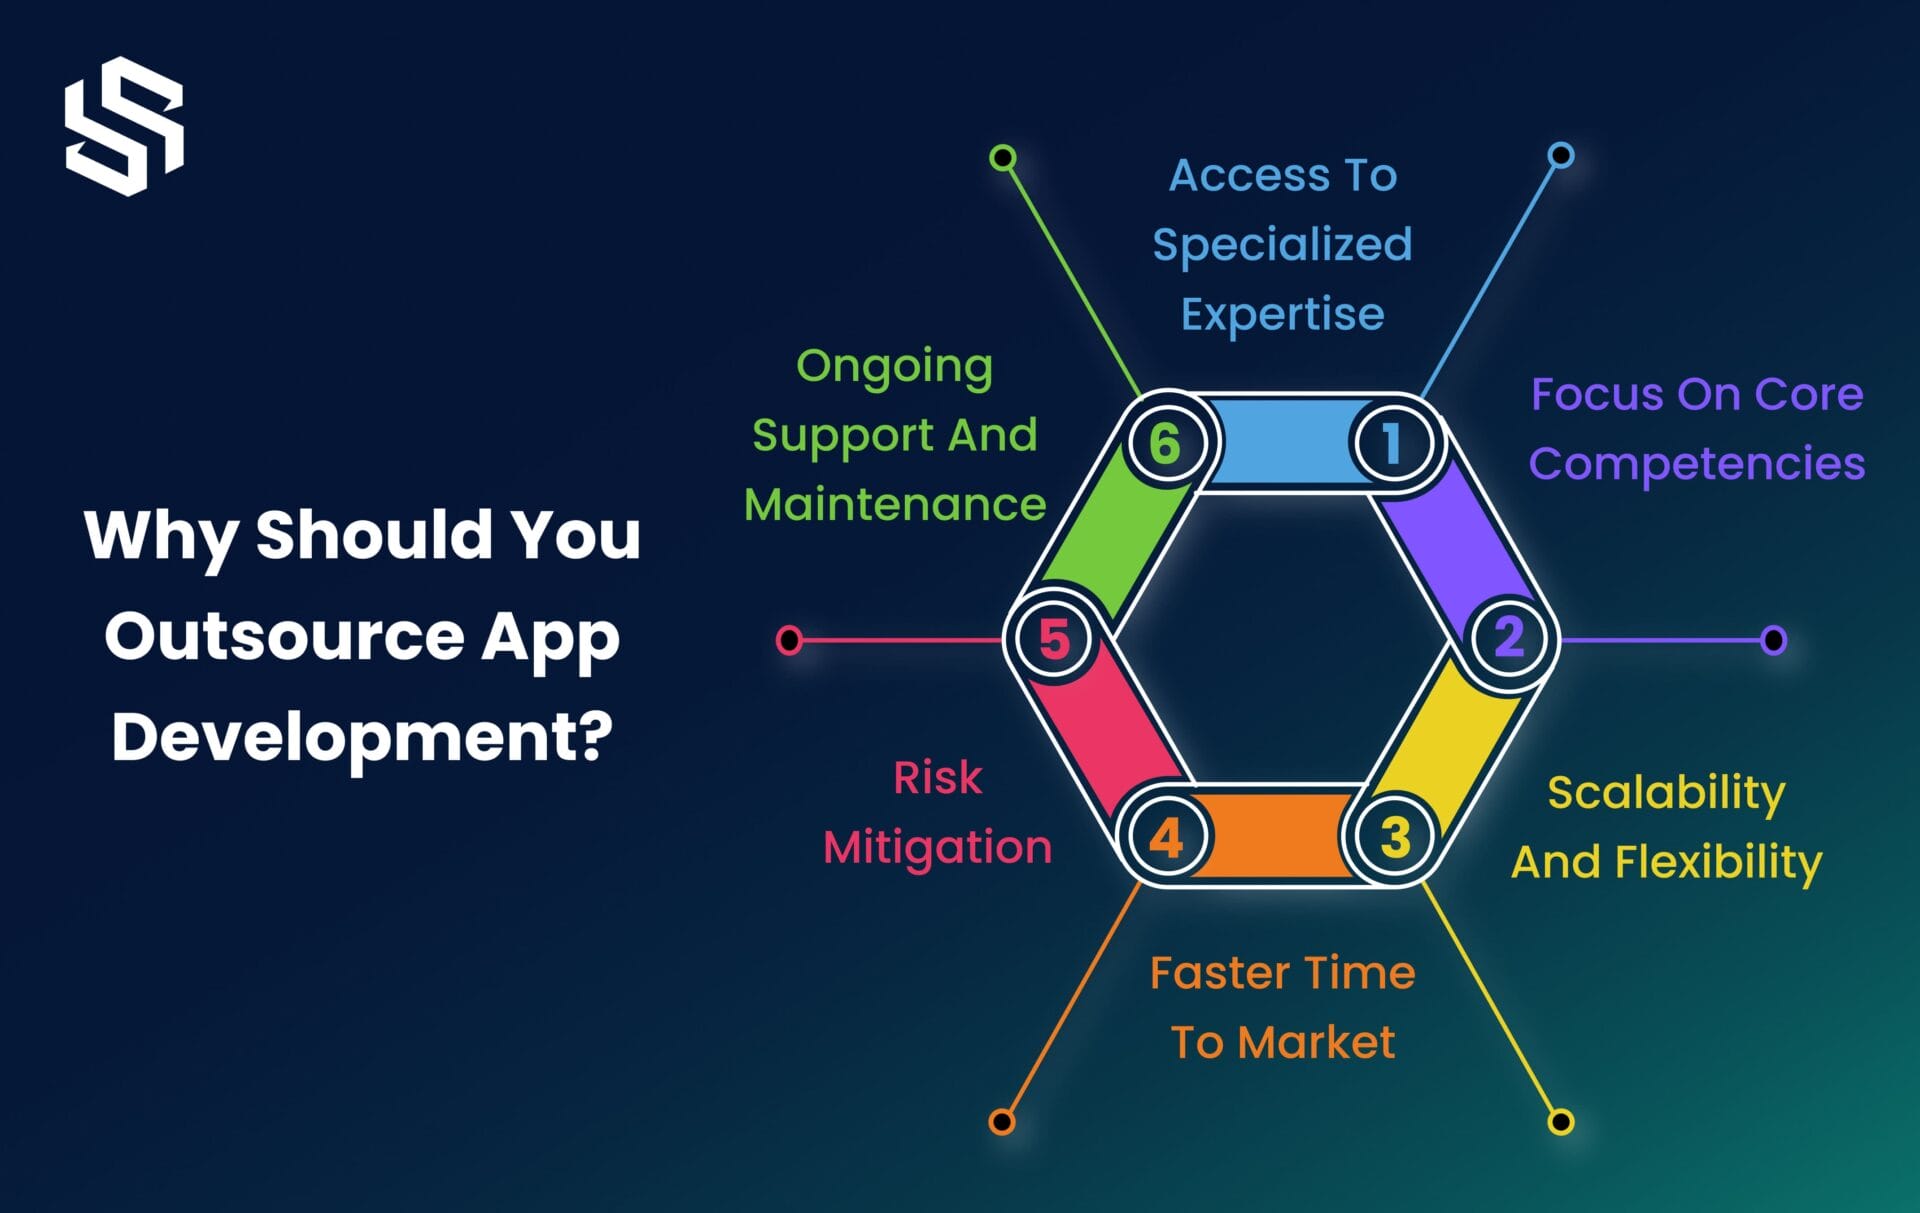 Why Should You Outsource App Development